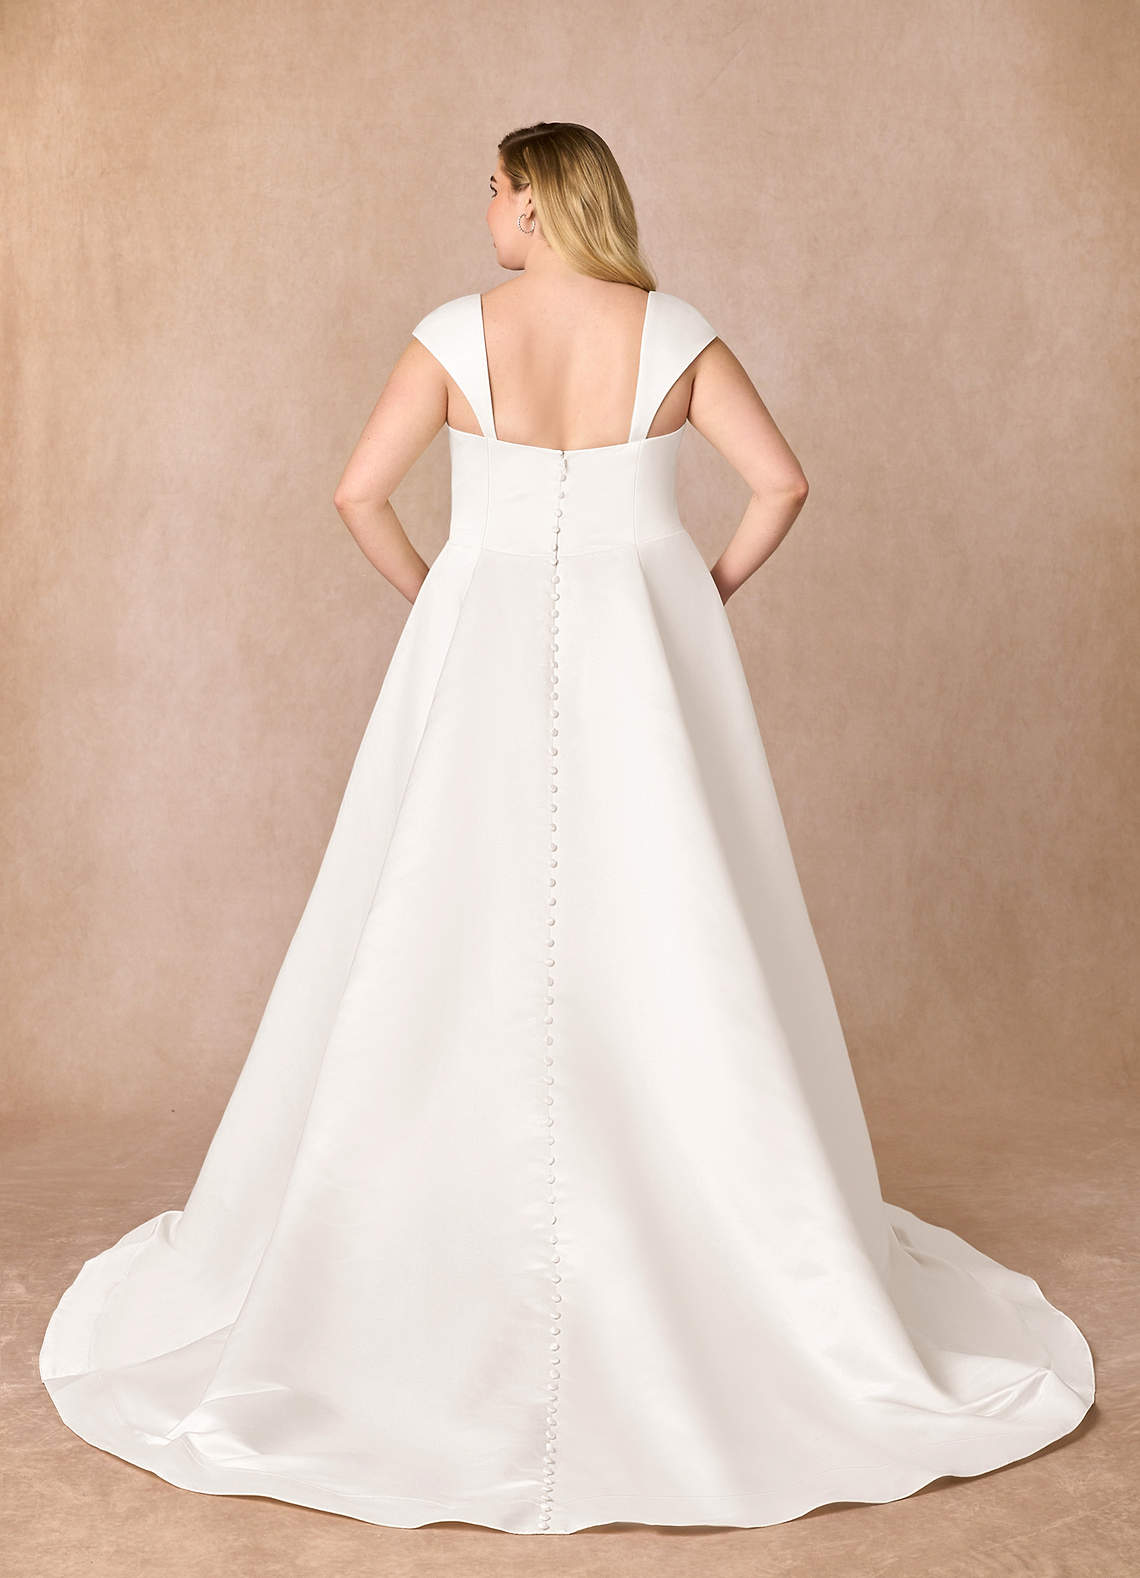 Azazie Luxia Wedding Dresses A-Line Sweetheart Neckline Matte Satin Cathedral Train Dress image1